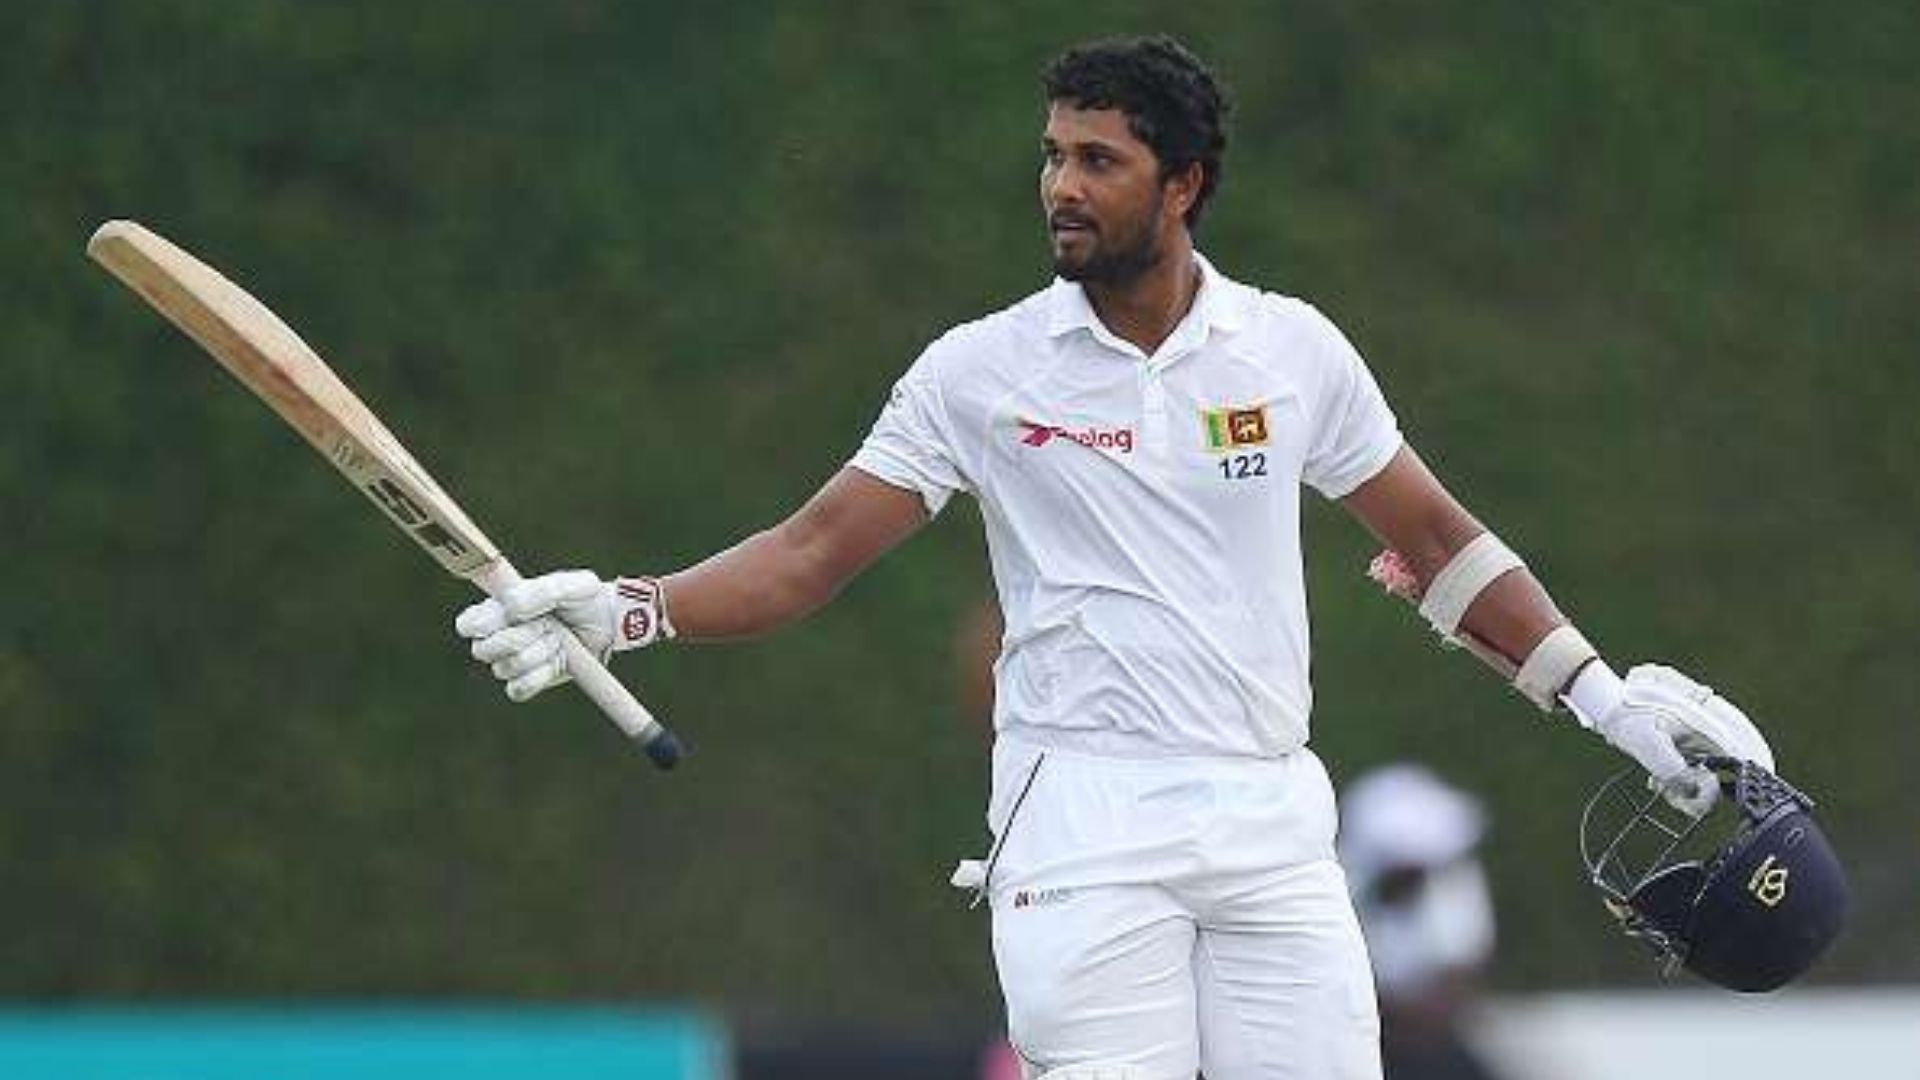 Dinesh Karthik feels former Sri Lanka captain Dinesh Chandimal is not high up in the pecking order for the playing XI